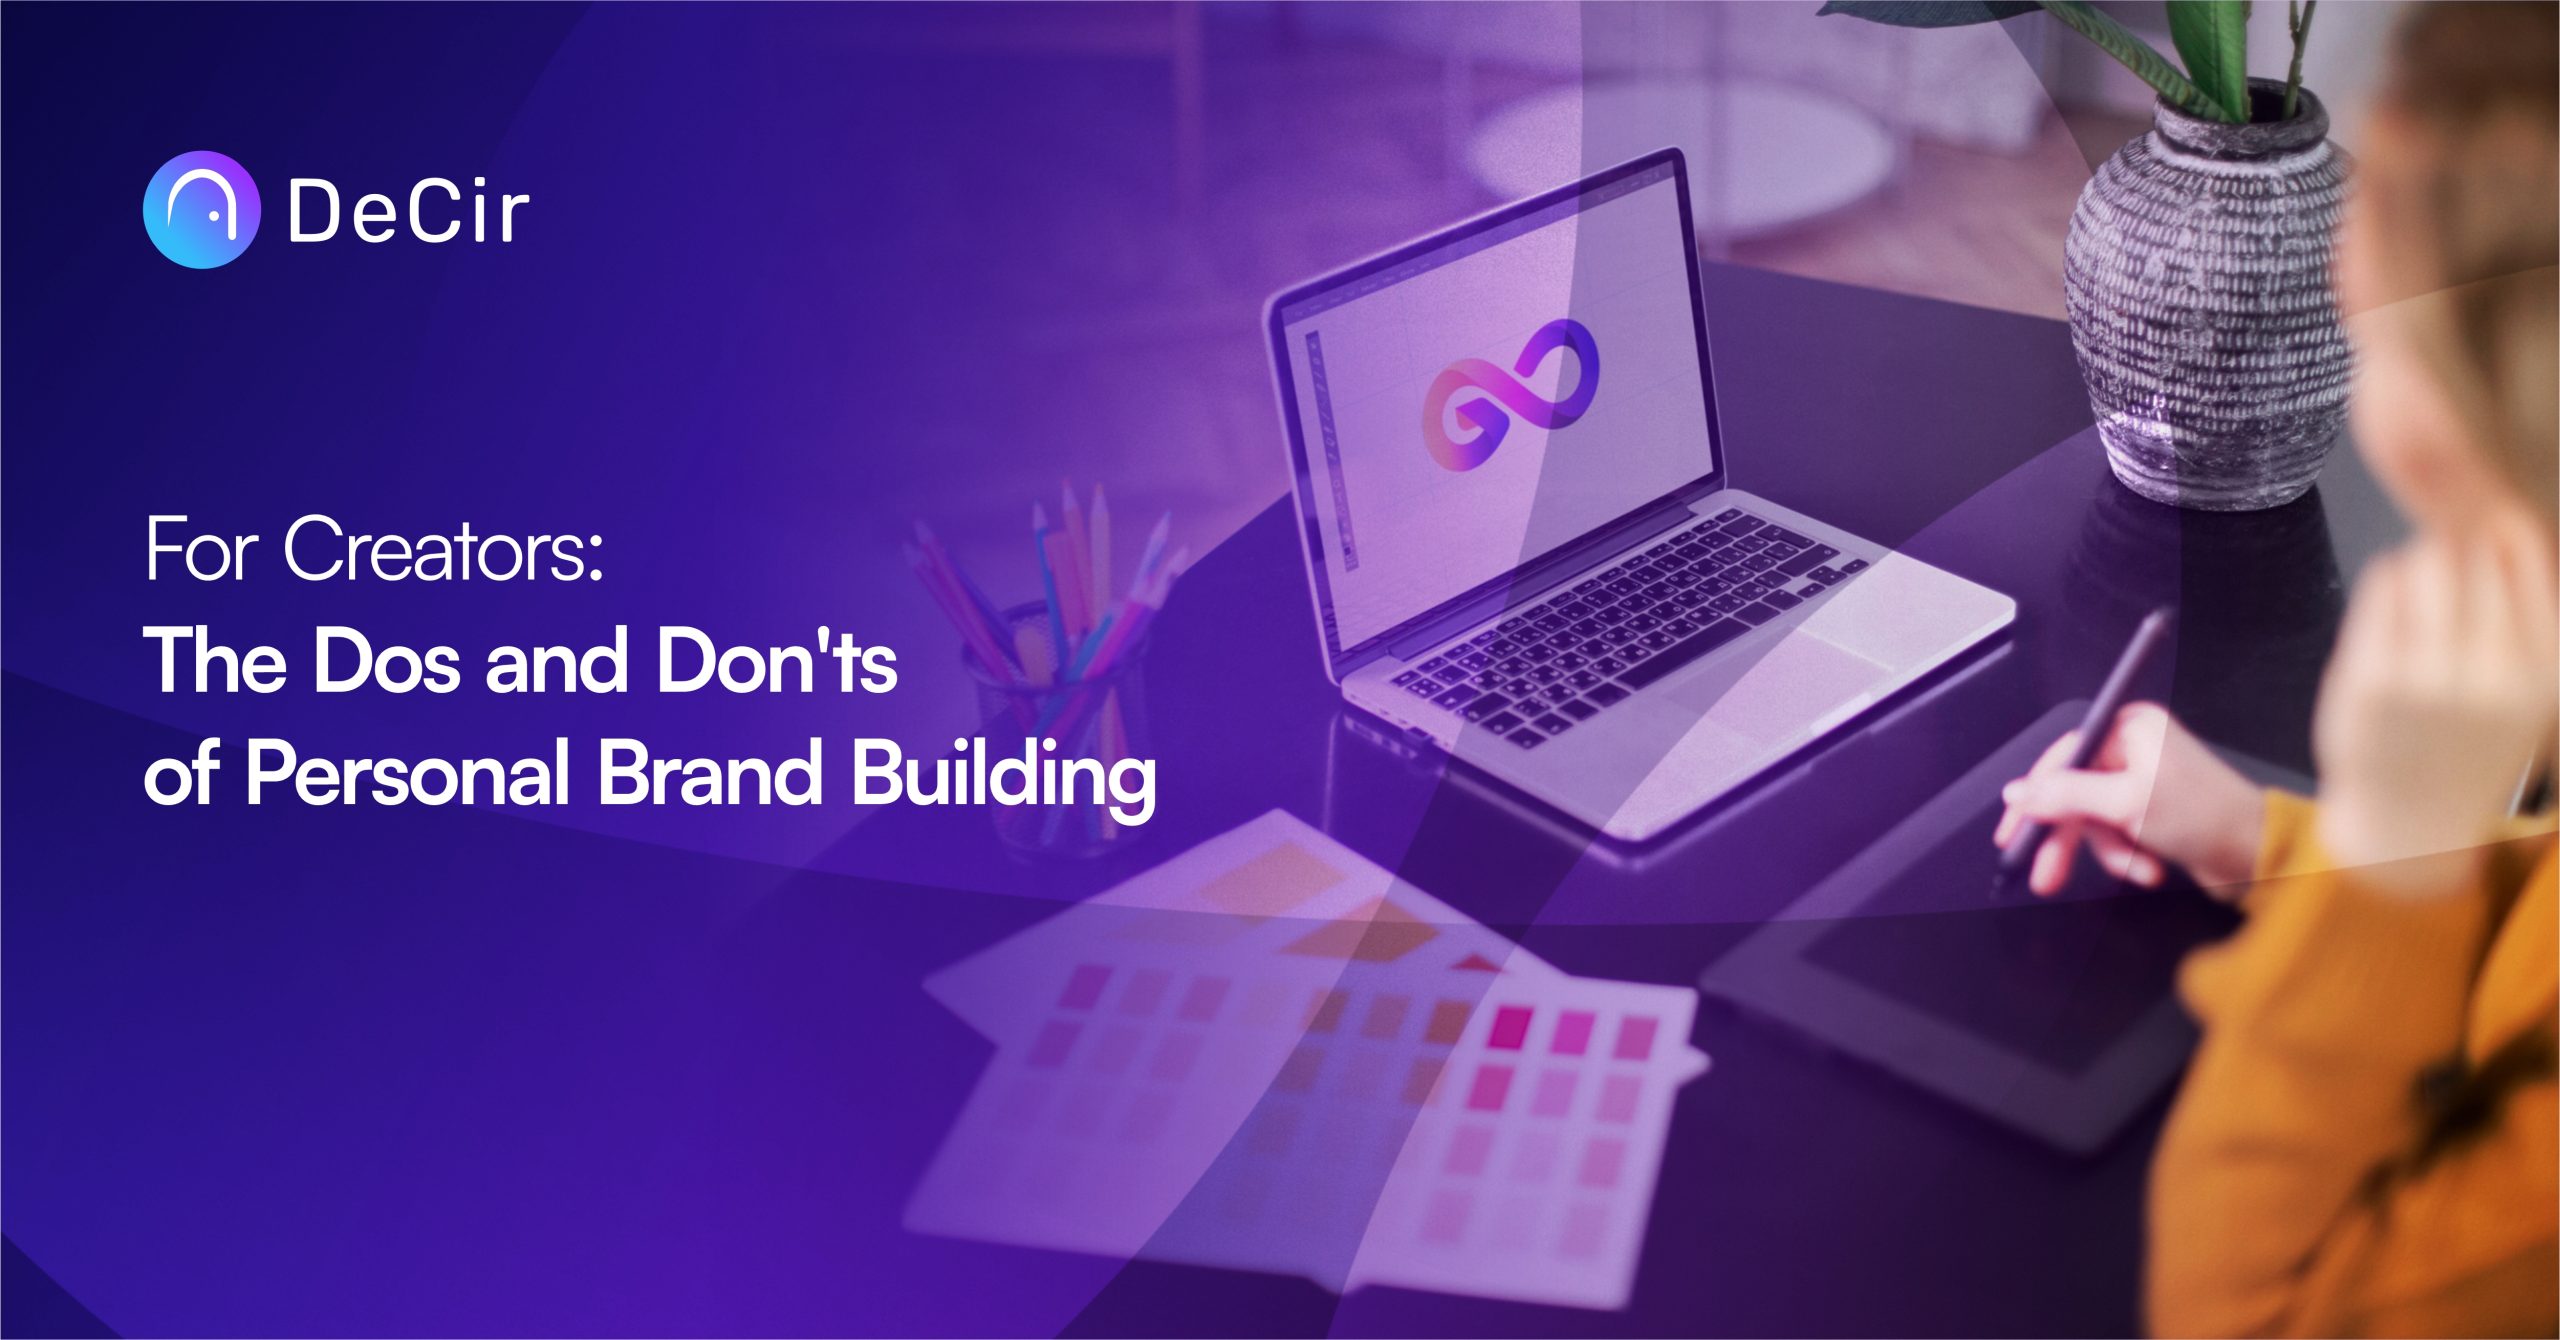 For Creators: The Dos and Don'ts of Personal Brand Building